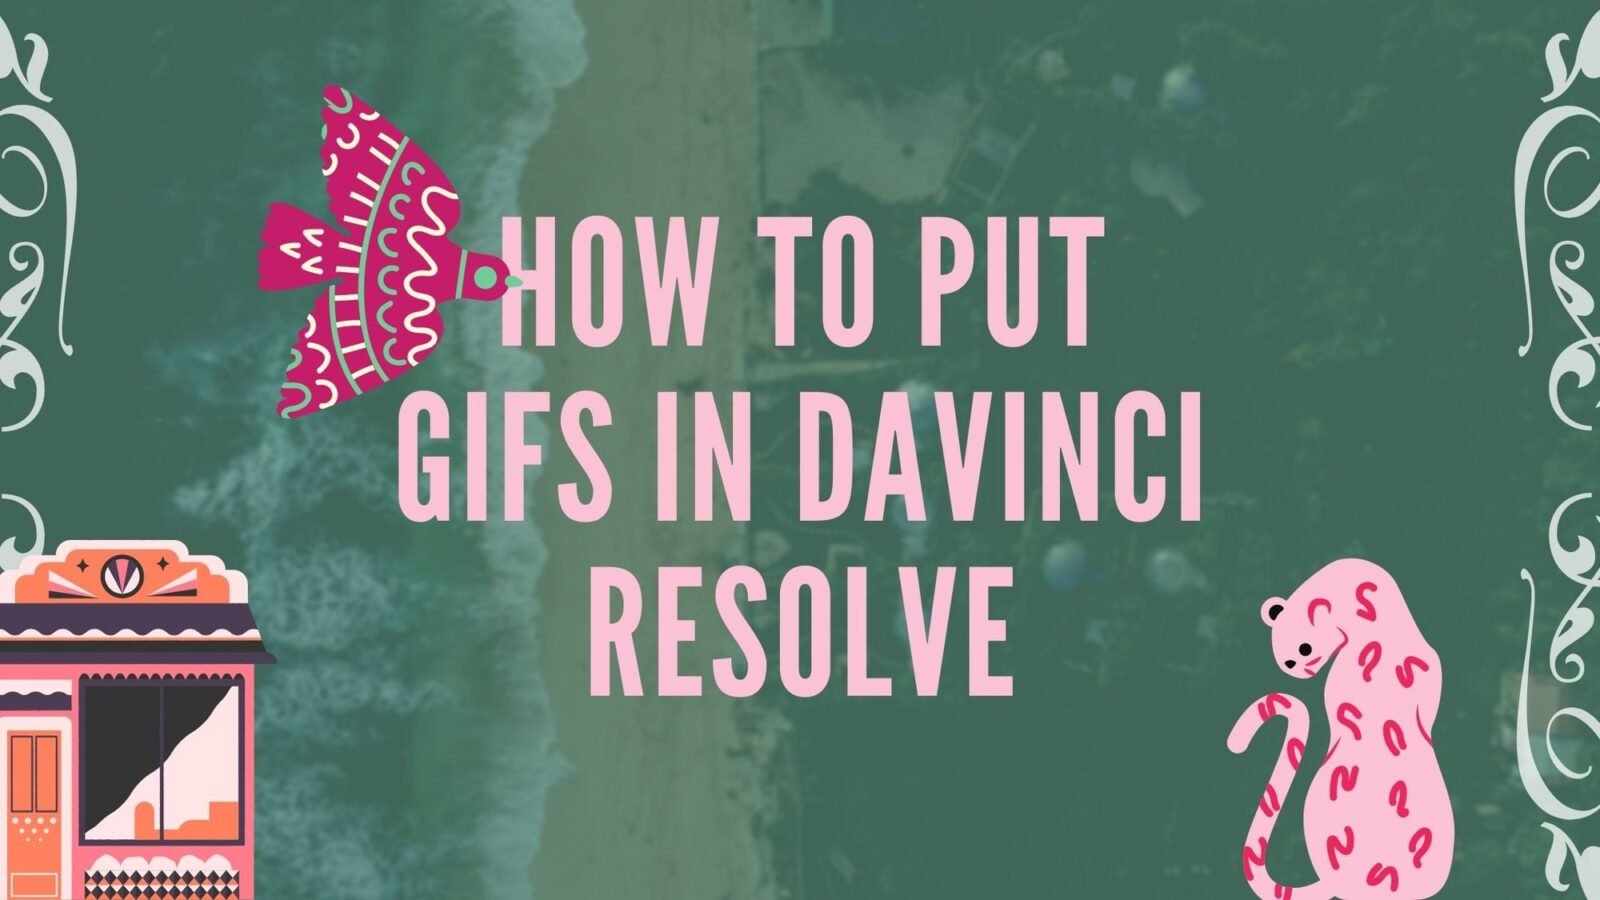 How To Put GIFs in Davinci Resolve (2 Easy Ways)